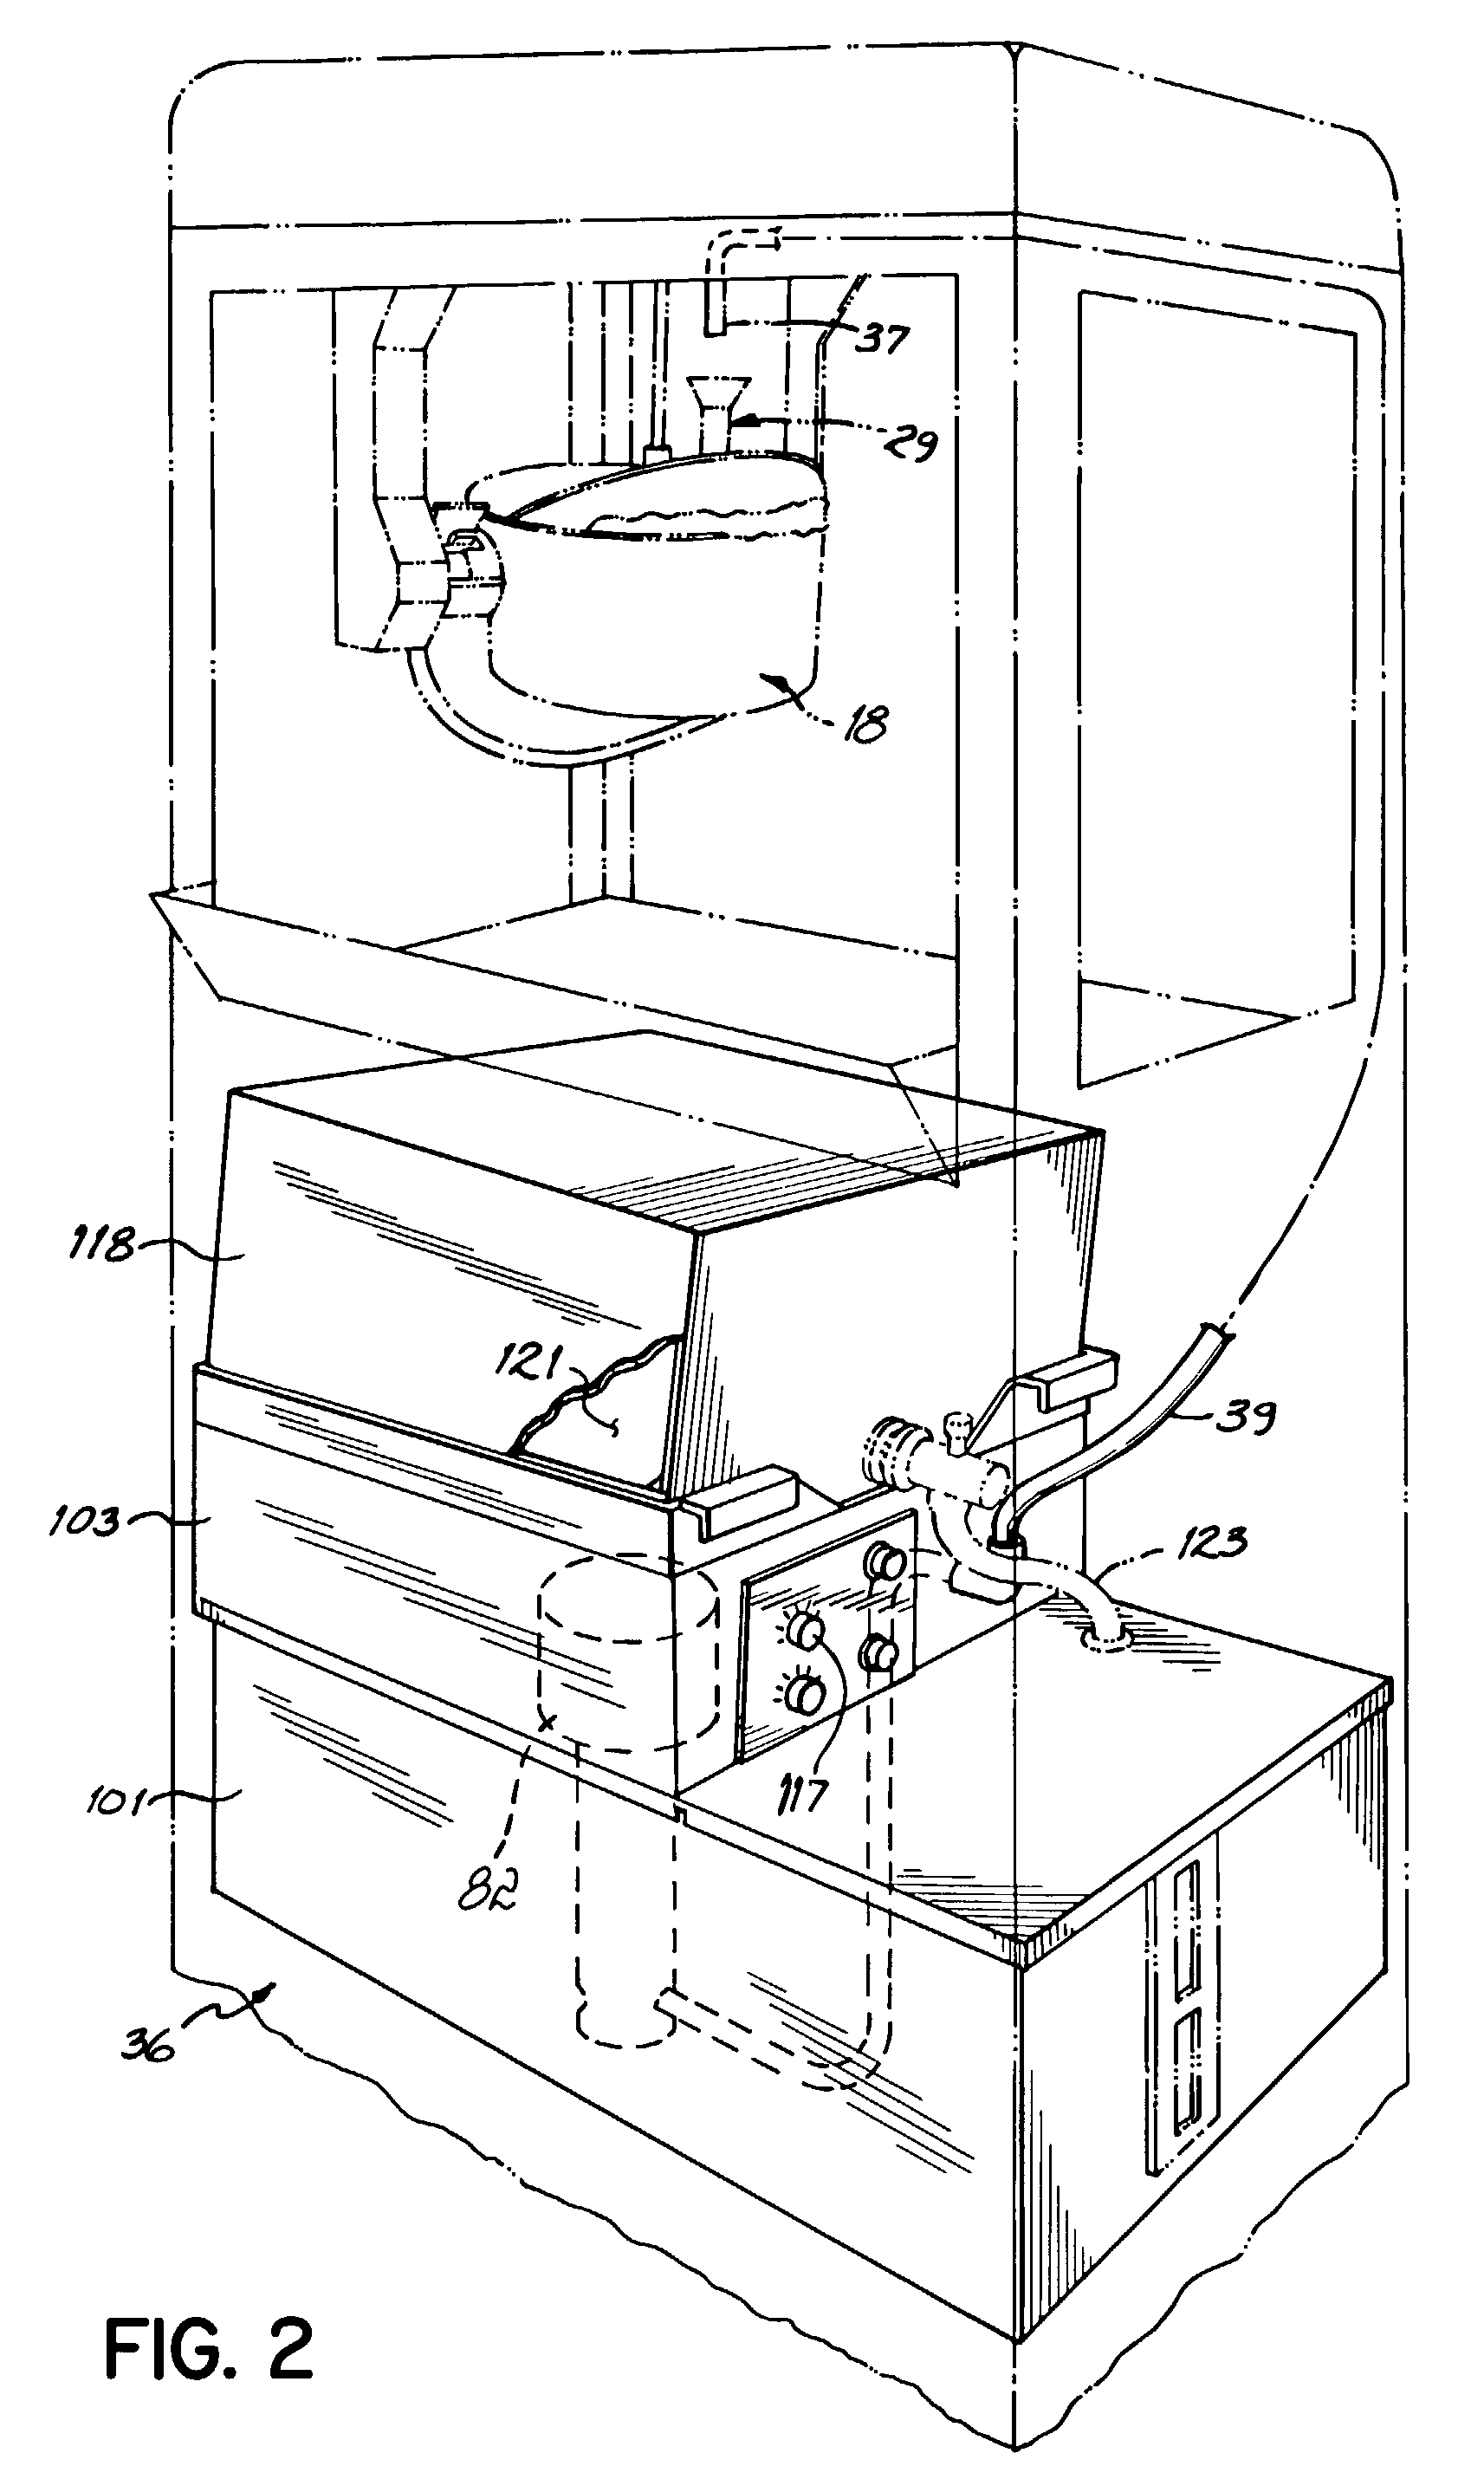 Automatic popcorn popper with flexible load capabilities